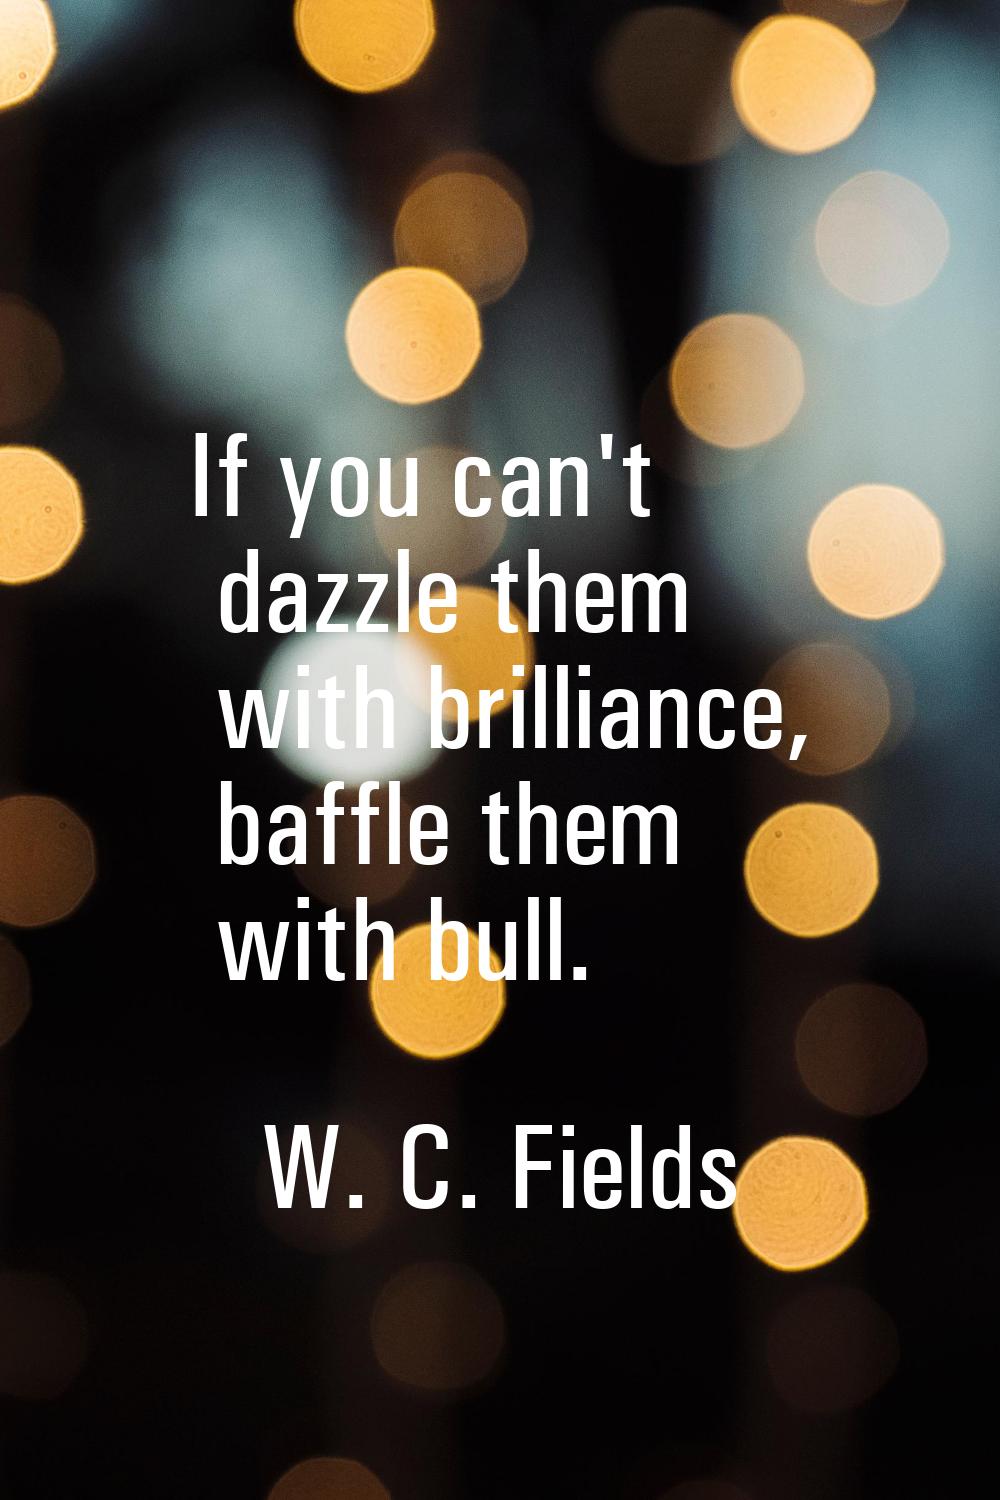 If you can't dazzle them with brilliance, baffle them with bull.